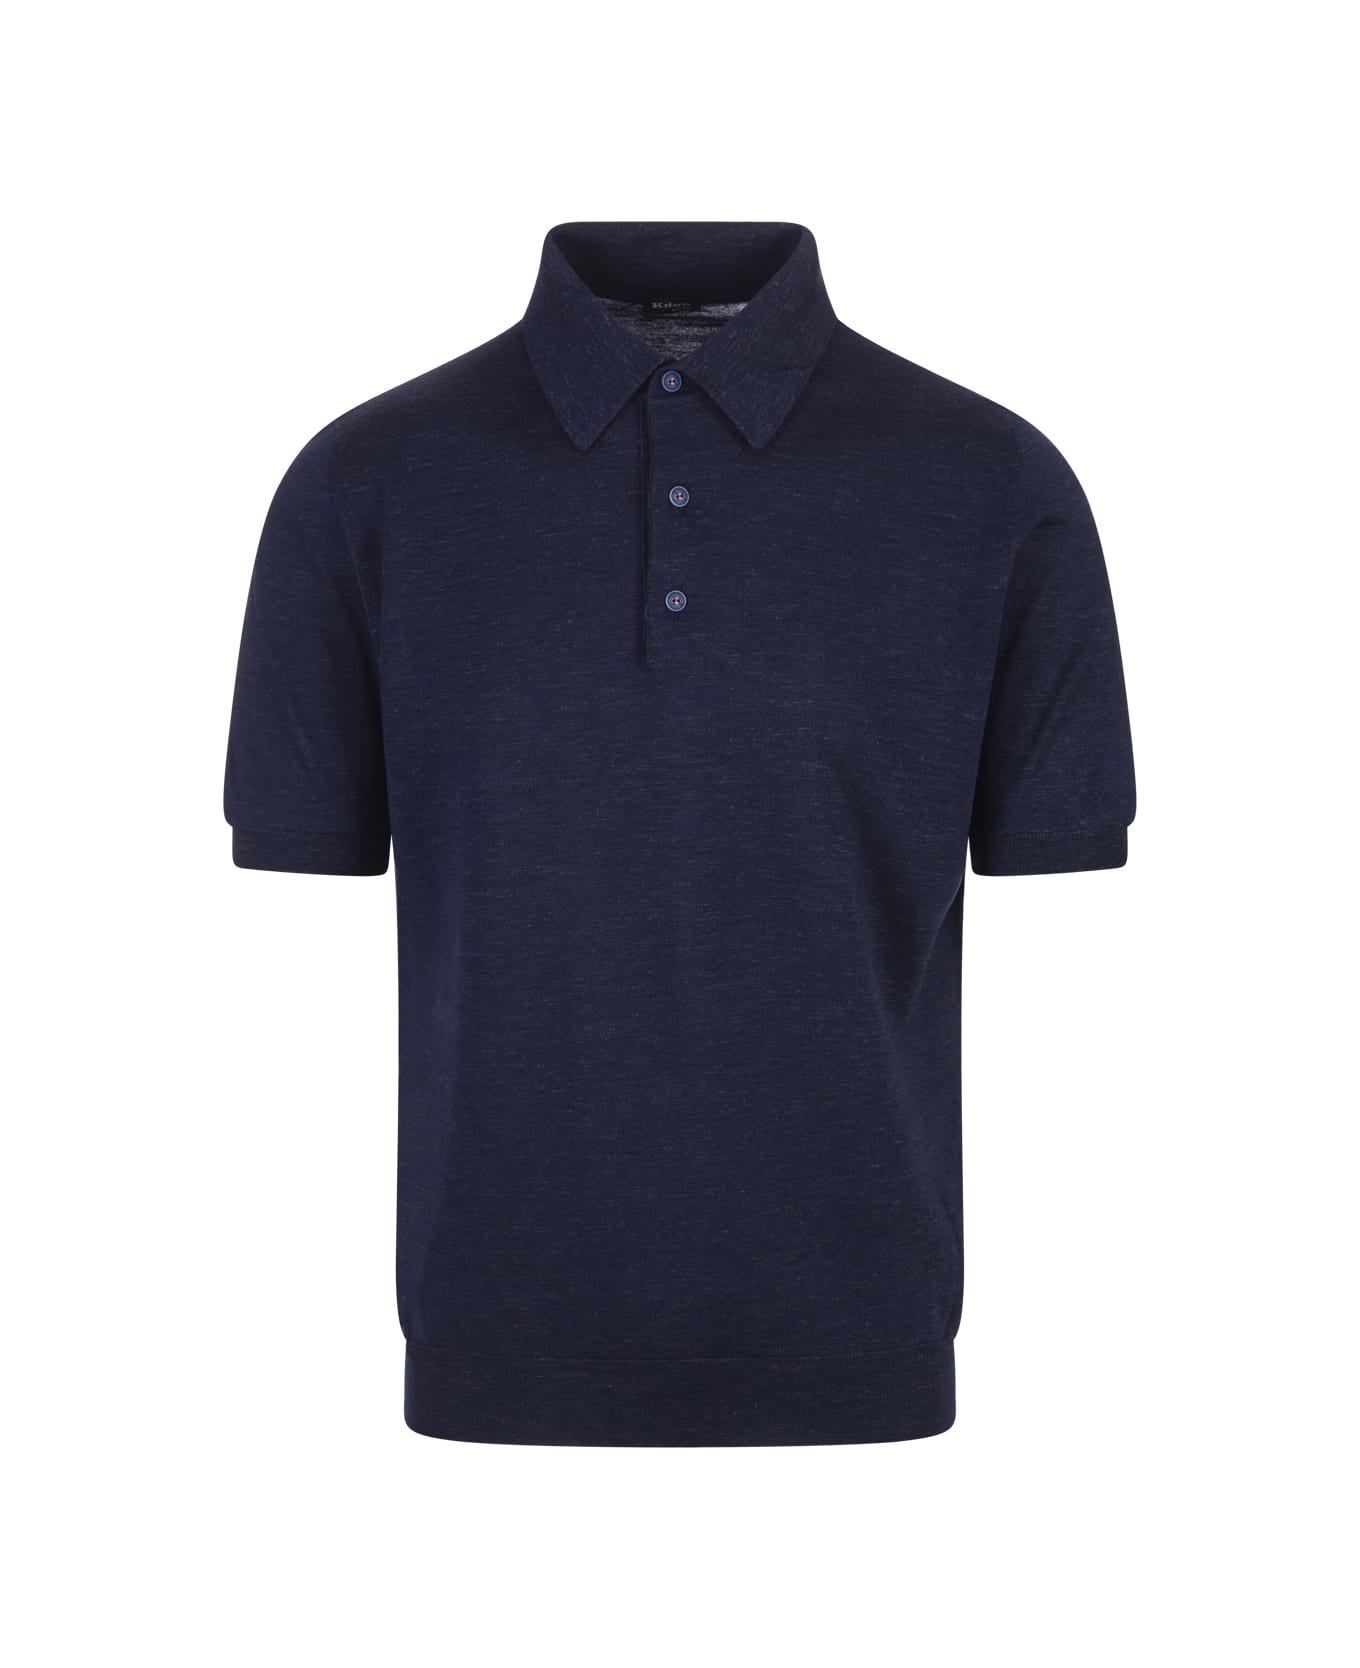 Kiton Navy Blue Knitted Short-sleeved Polo Shirt - Blue ポロシャツ